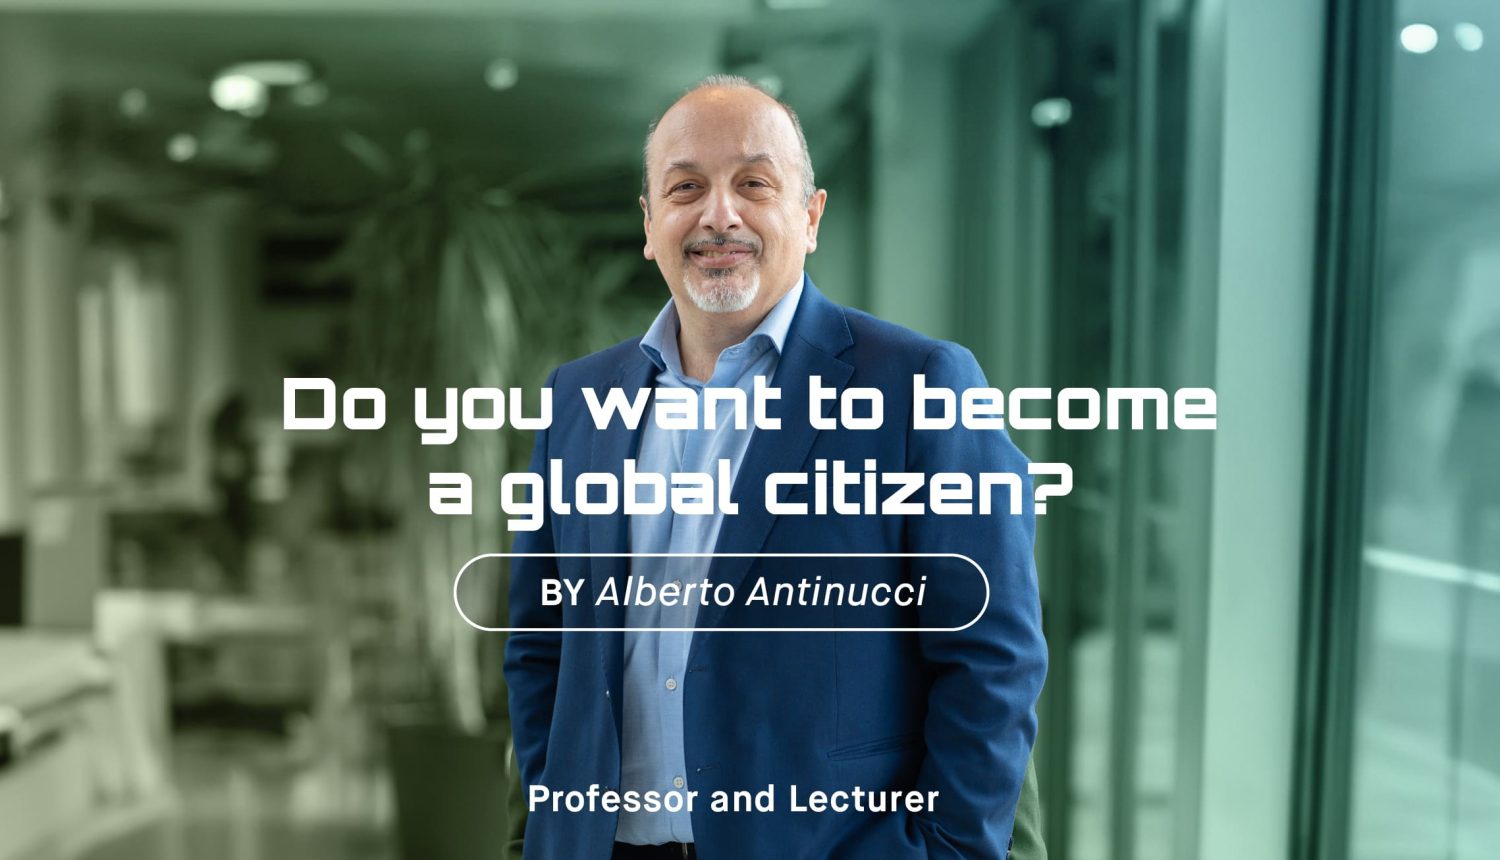 Do you want to become a global citizen?